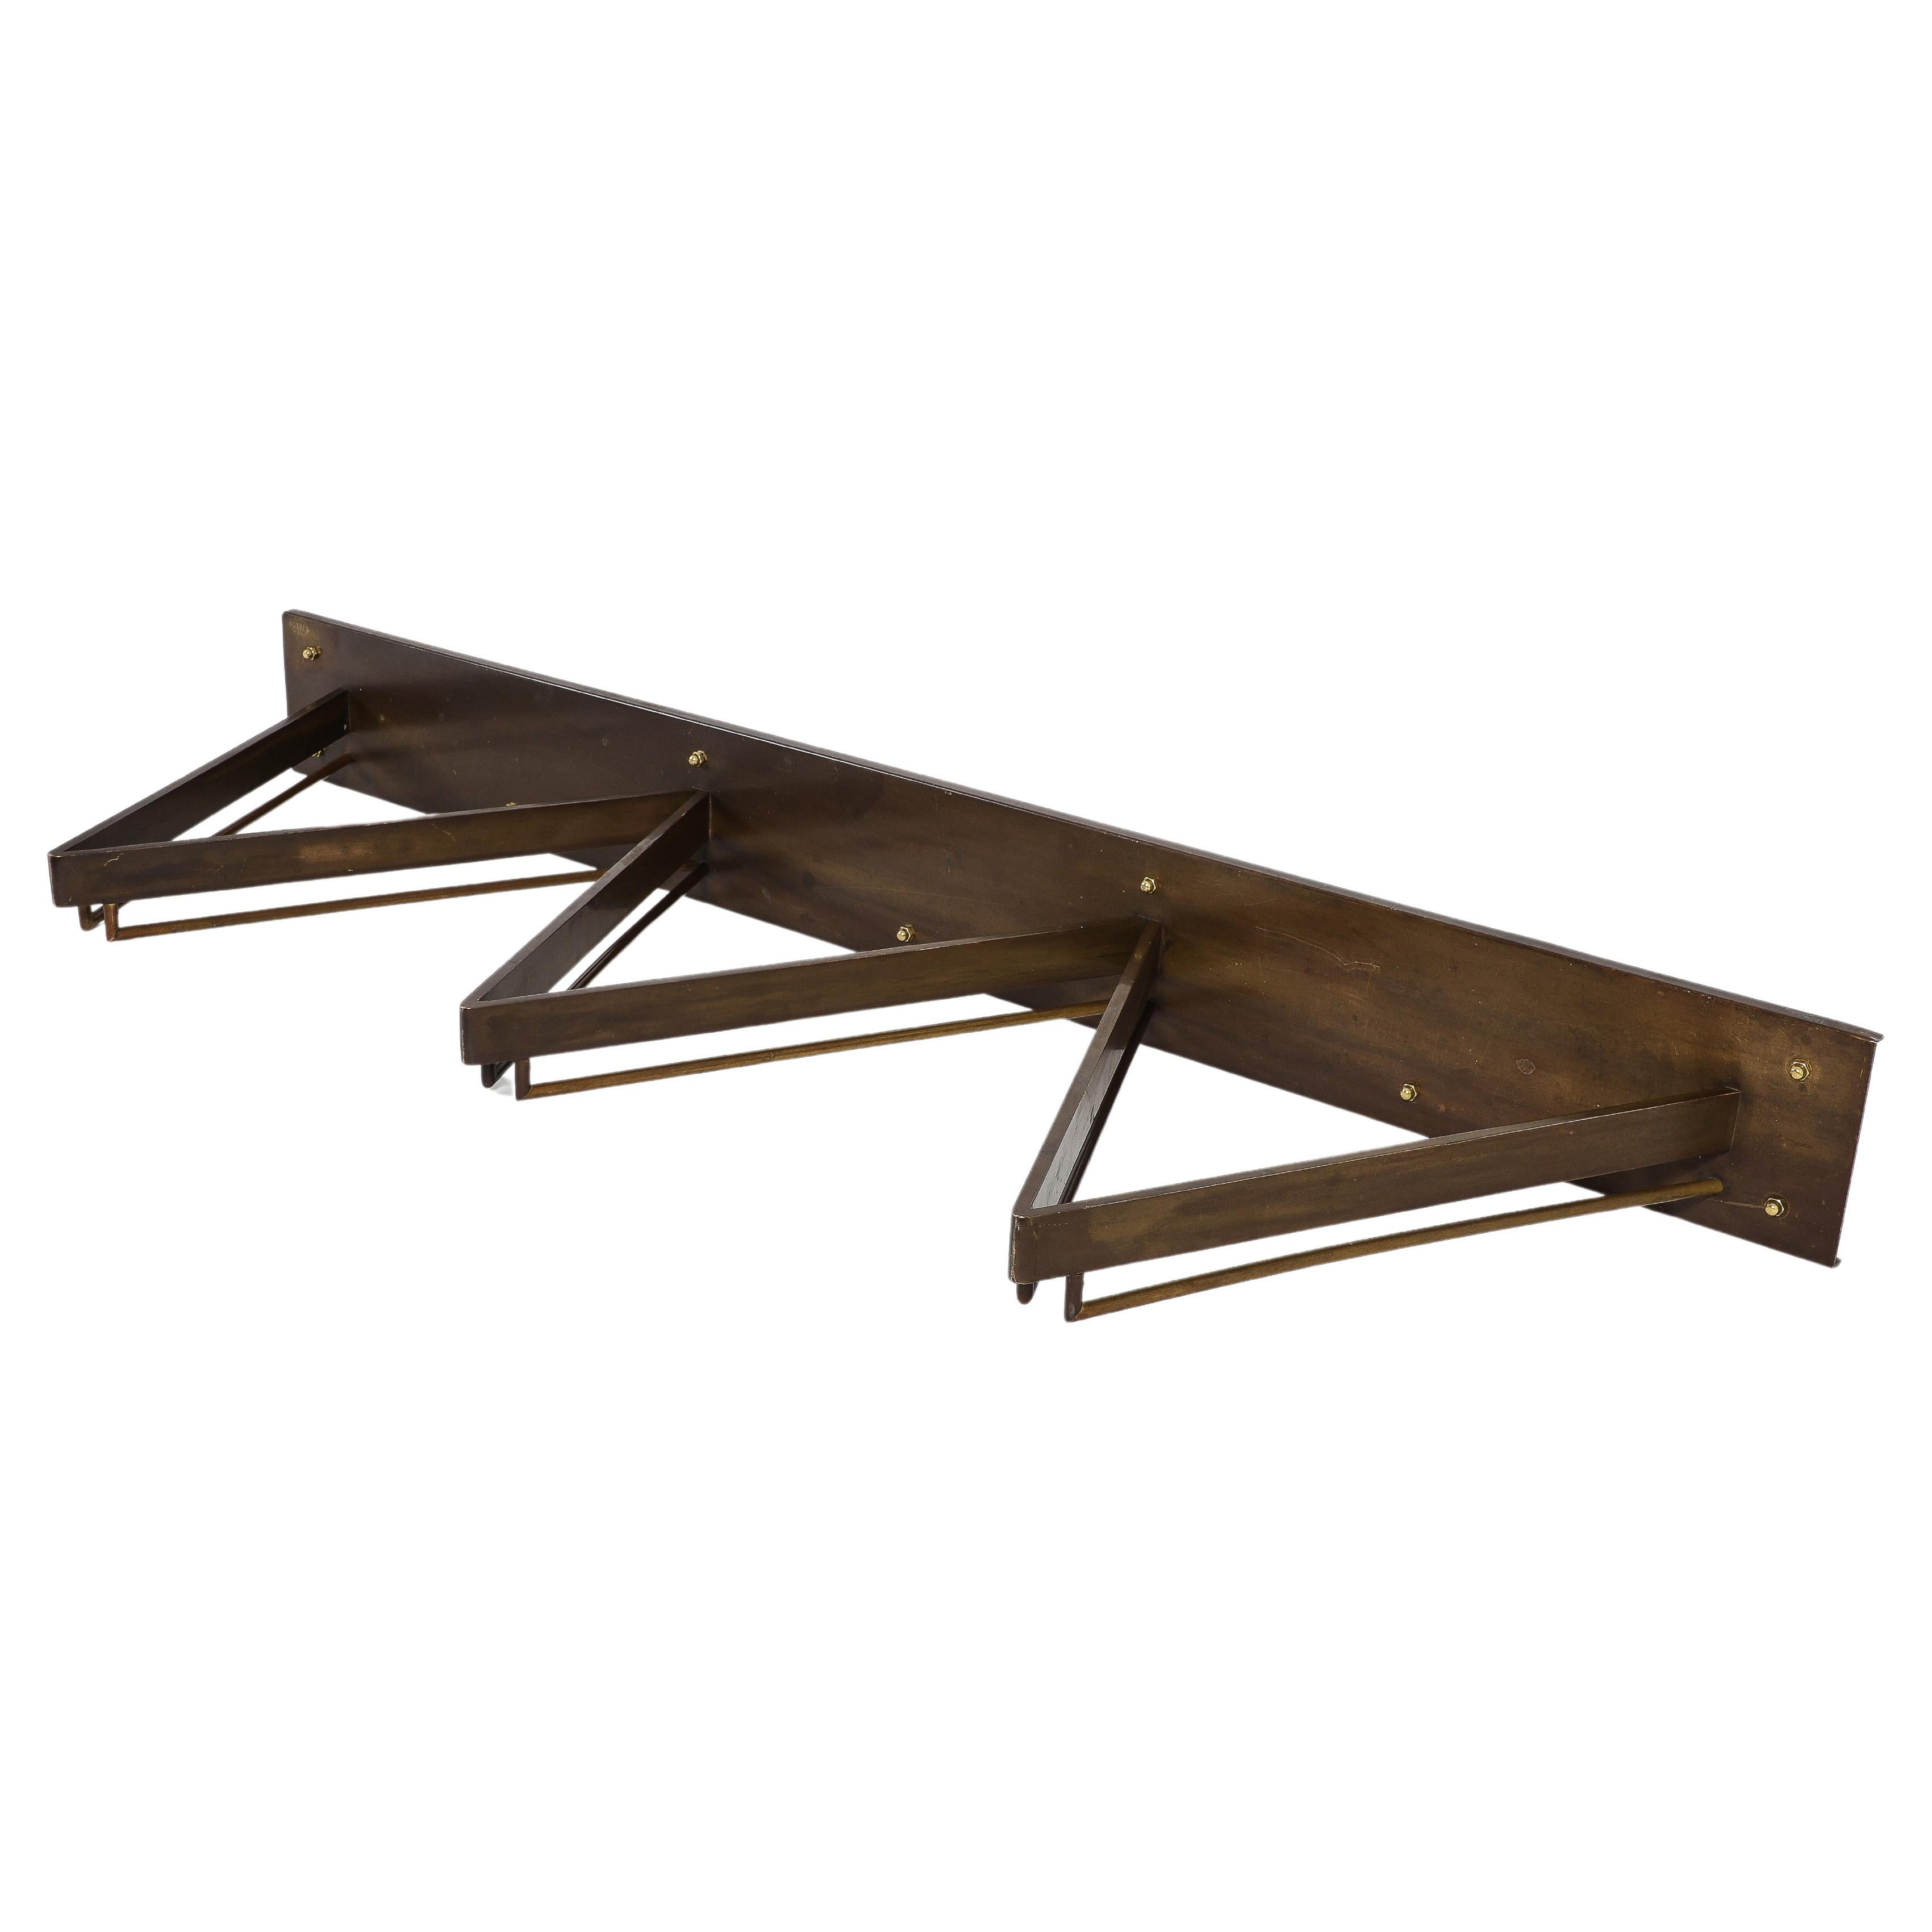 Hermes Bronze Console or Coatrack, France 1940's For Sale